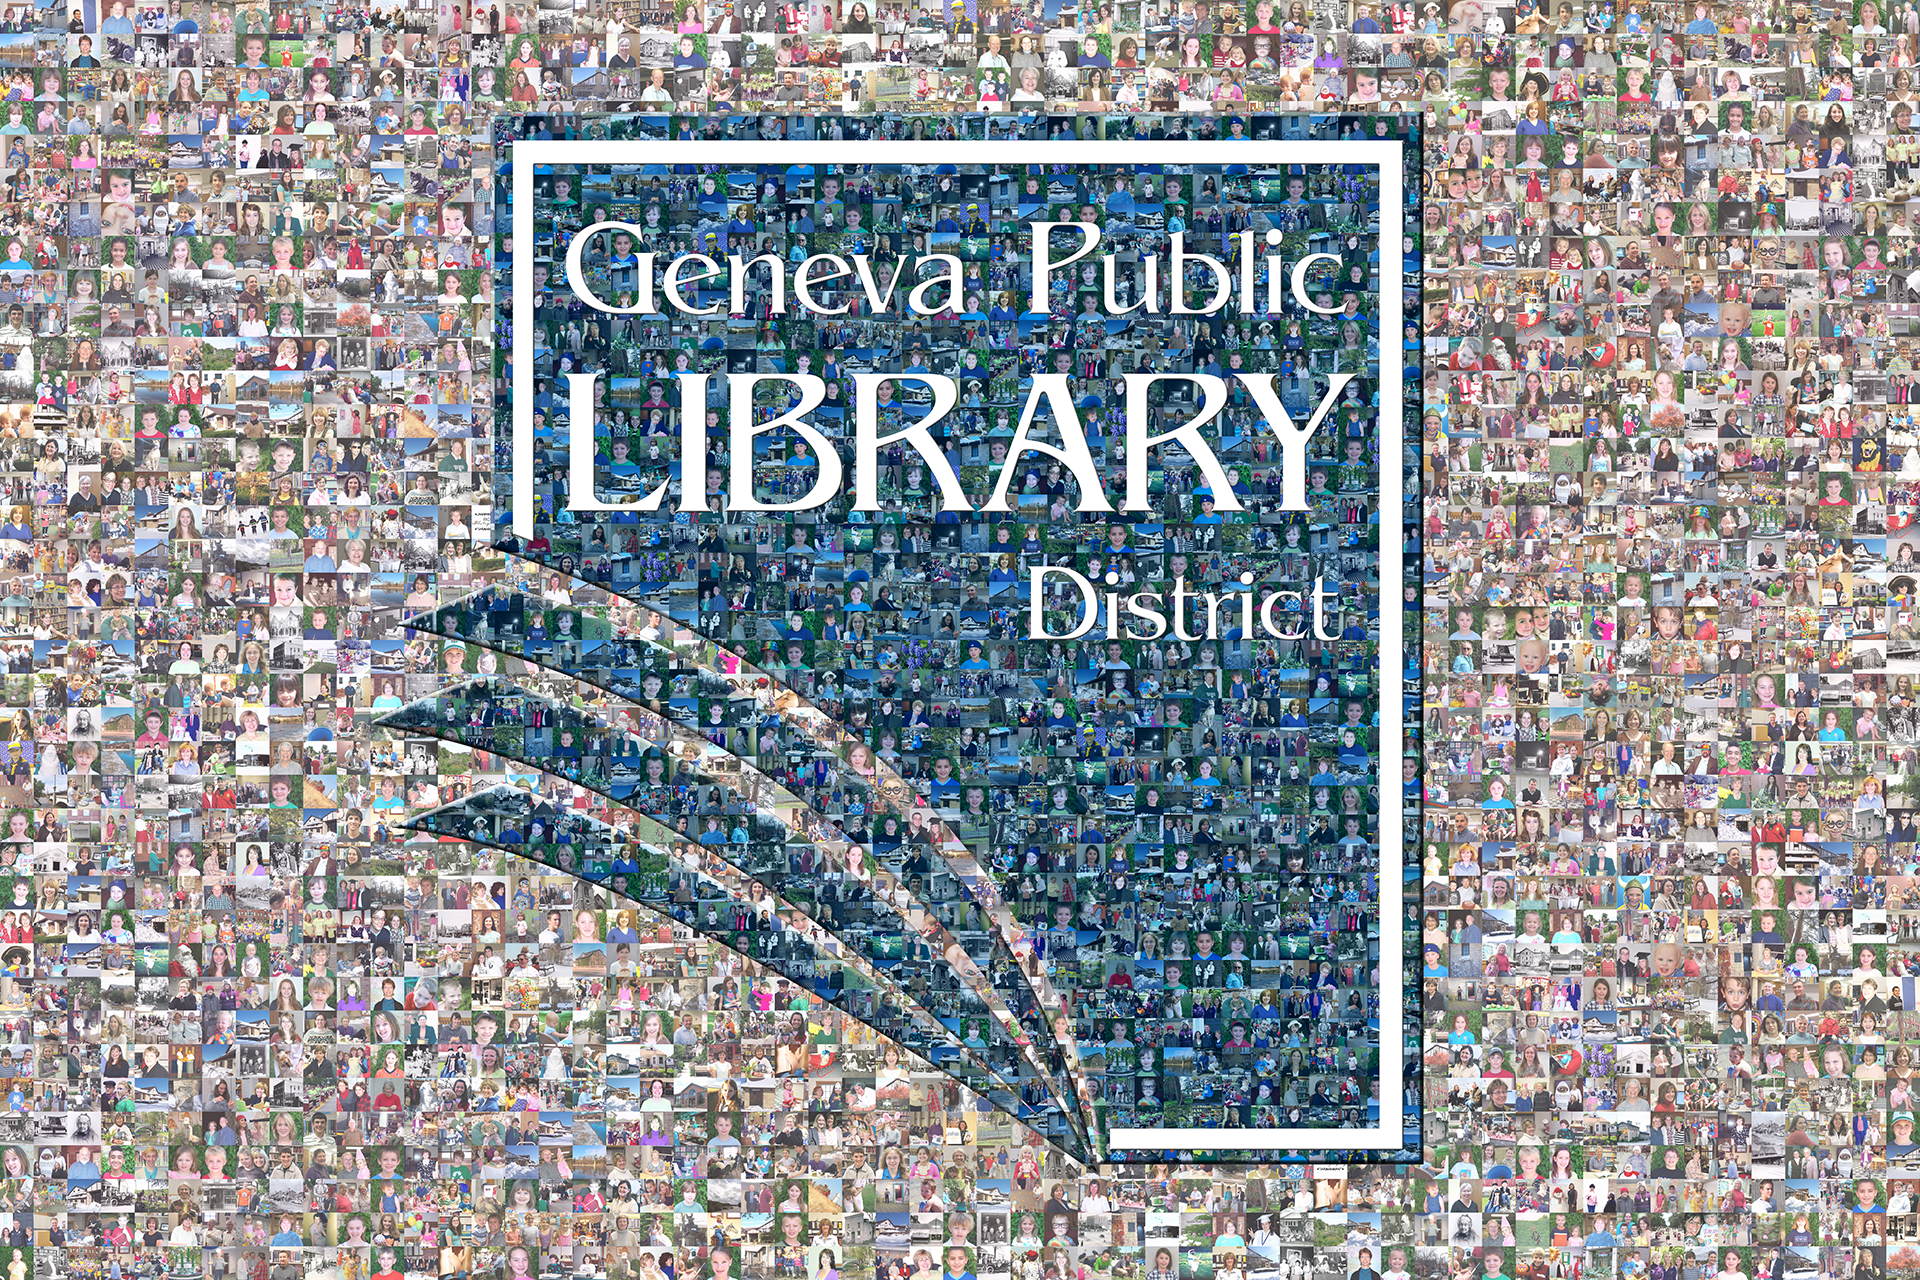 photo mosaic this public library used 610 photos of its members to create this tiered mosaic